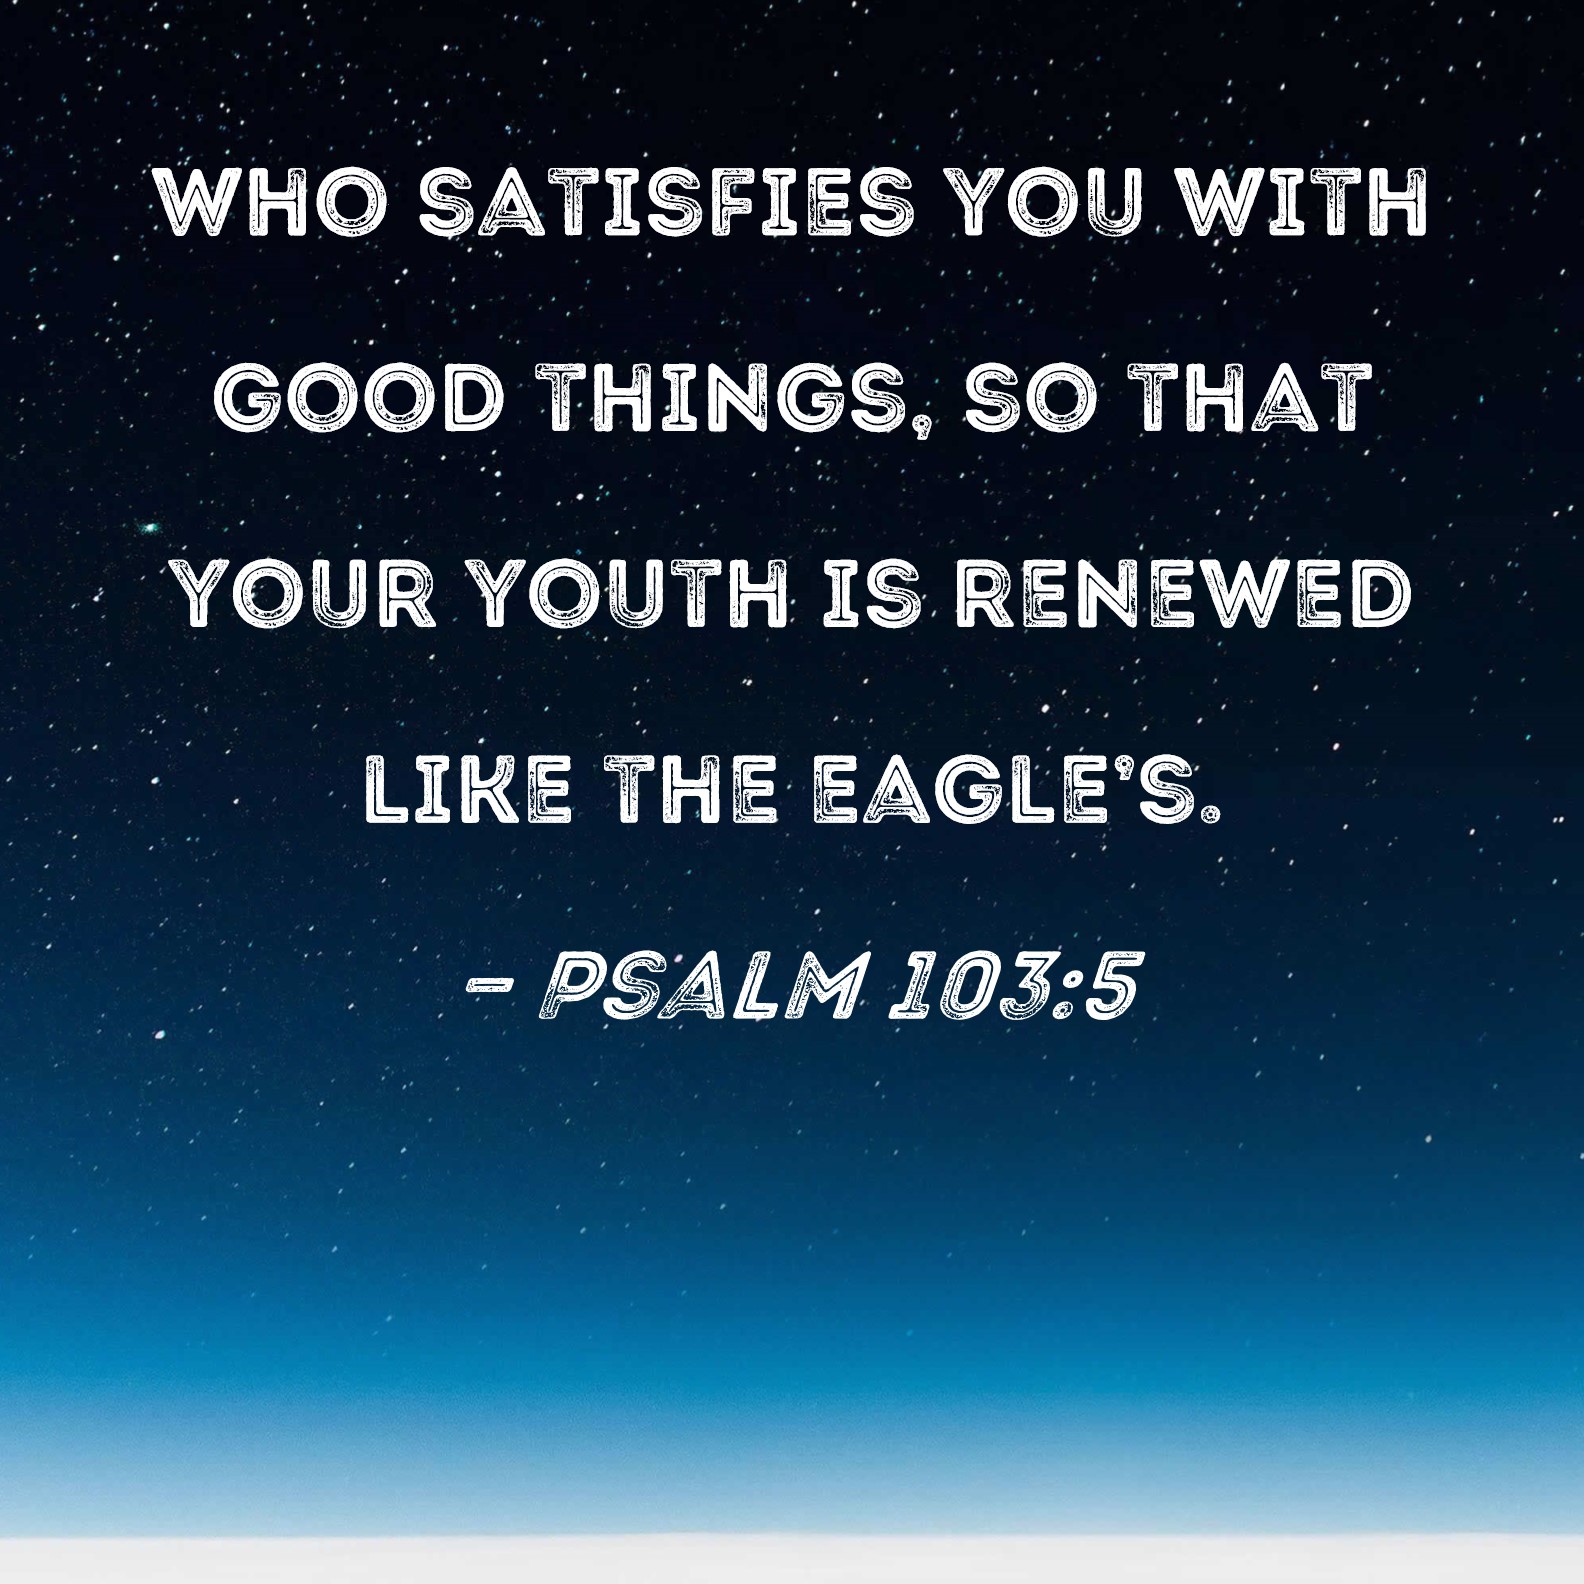 Psalms 103:5 KJV - Who satisfieth thy mouth with good things; so